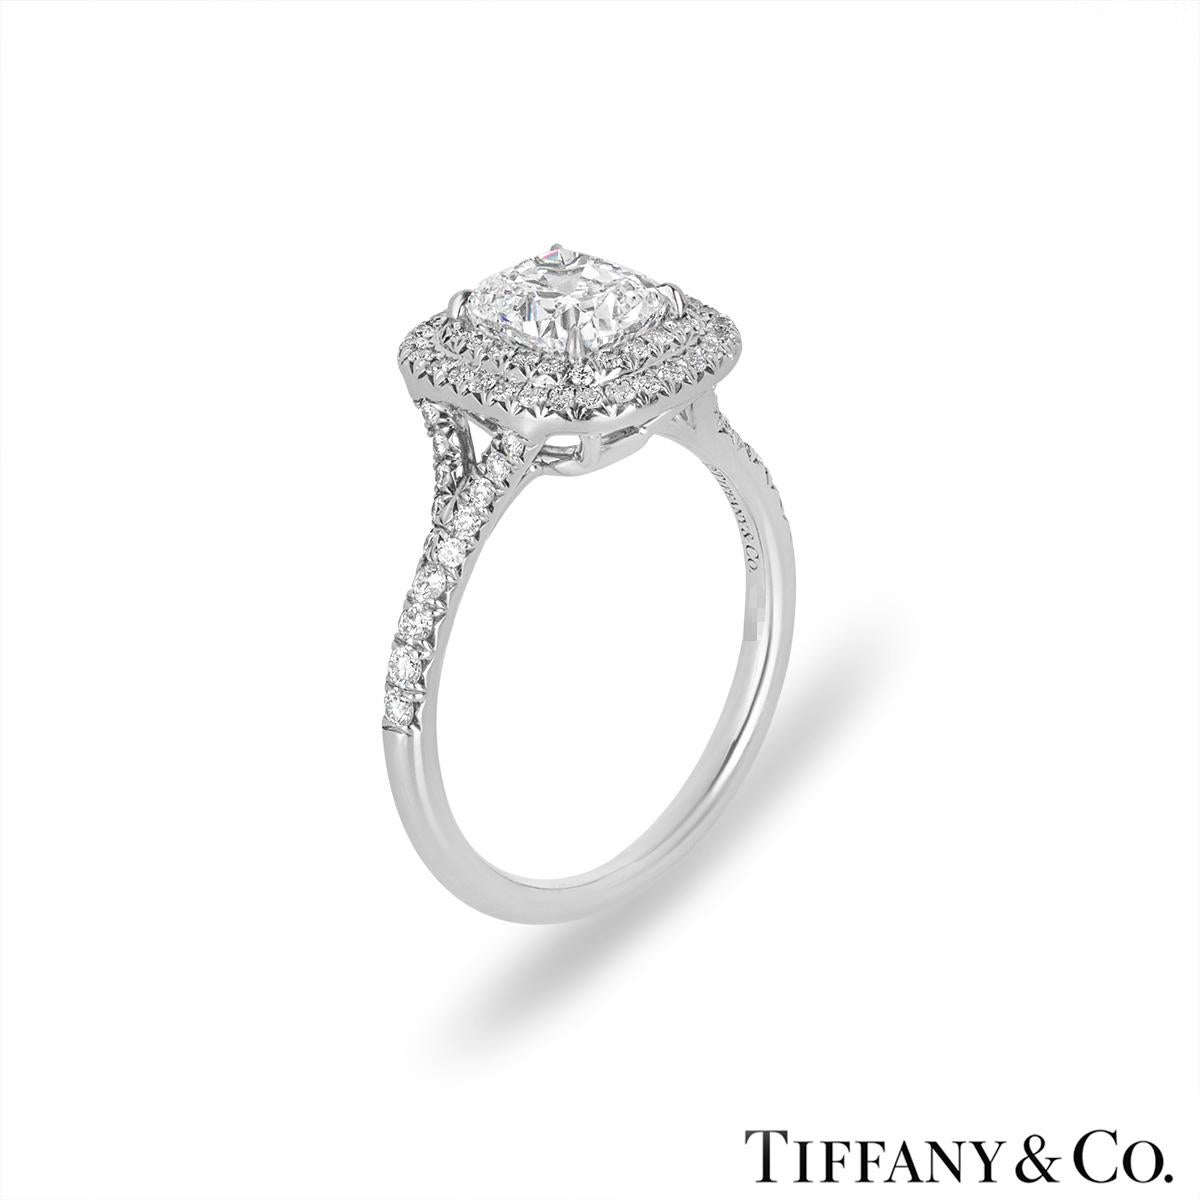 A scintillating platinum diamond engagement ring by Tiffany & Co. from the Soleste collection. The ring is set to the centre with a gorgeous cushion cut diamond weighing 1.55ct, G colour and VS1 clarity. Complementing the centre diamond is a double